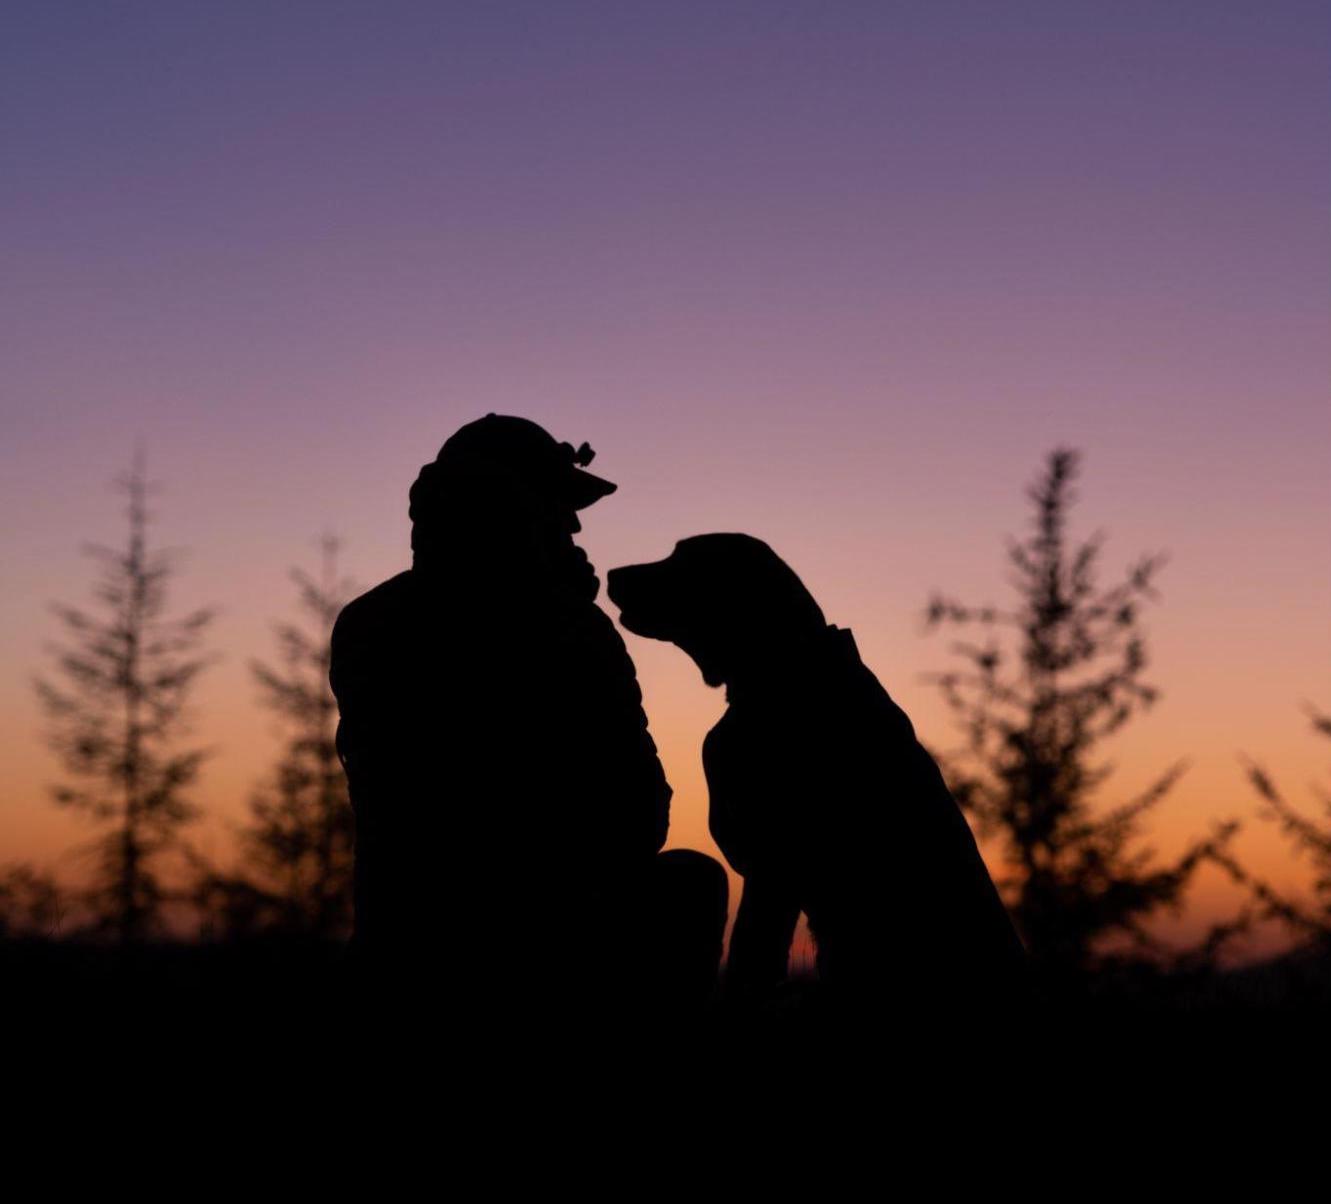 A man and his dog sit in nature and watch the sunset.